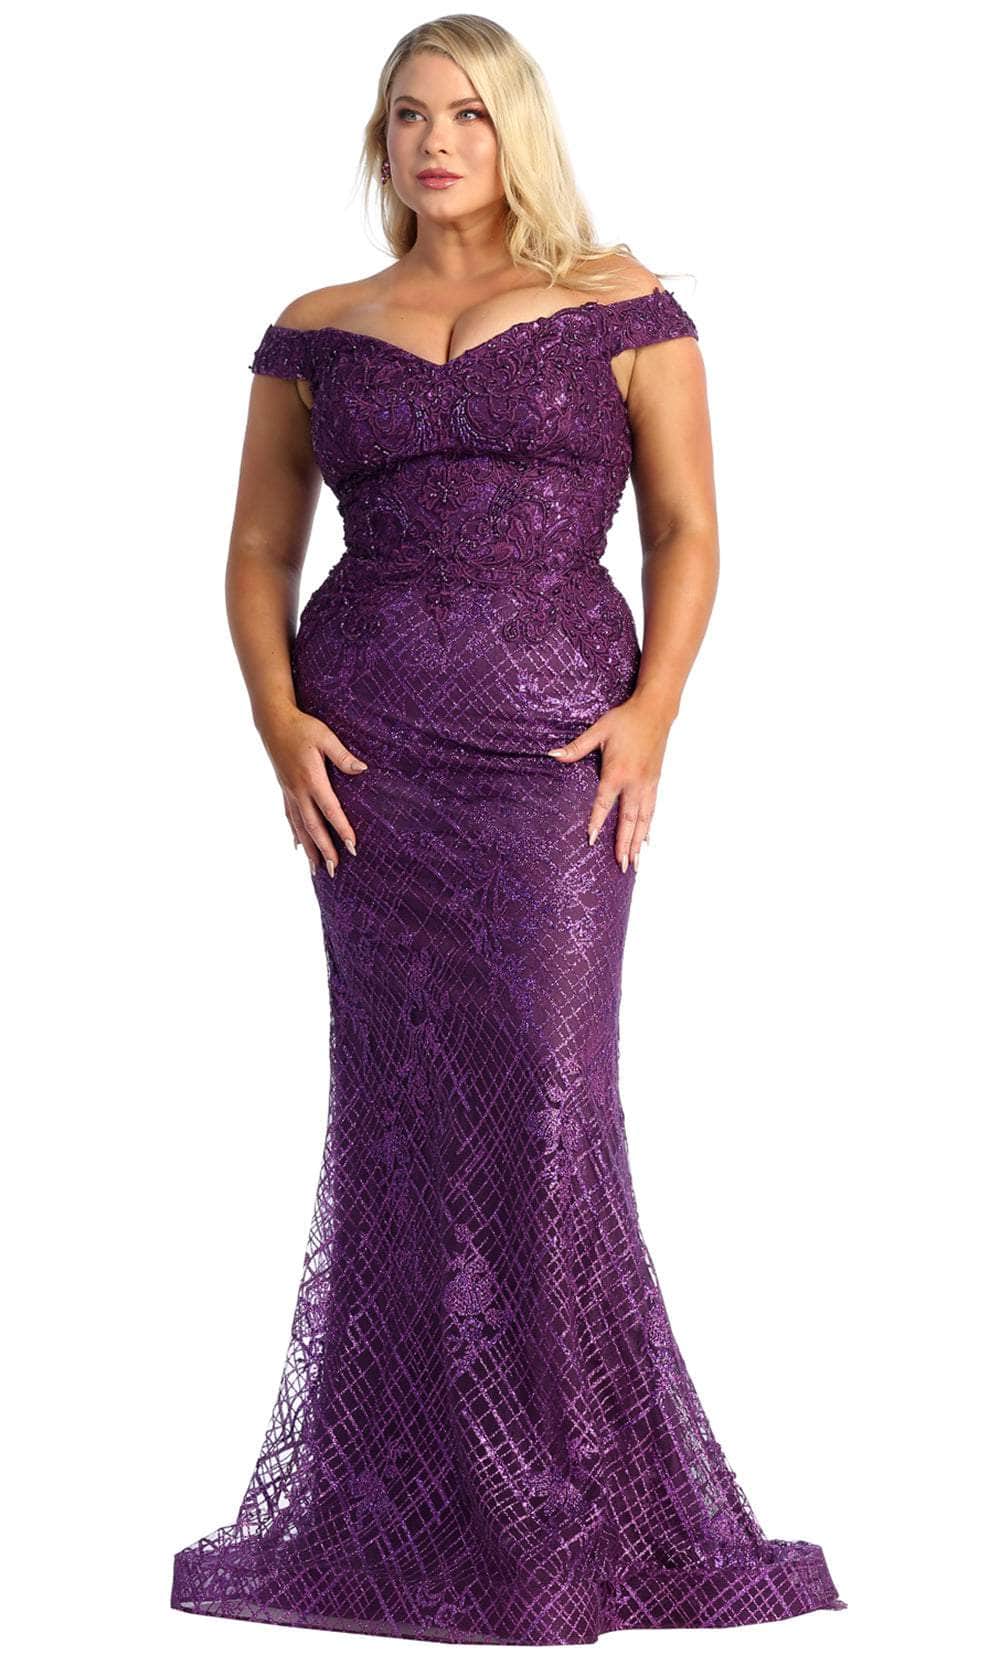 Image of May Queen RQ7930 - Embroidered Sheath Evening Dress